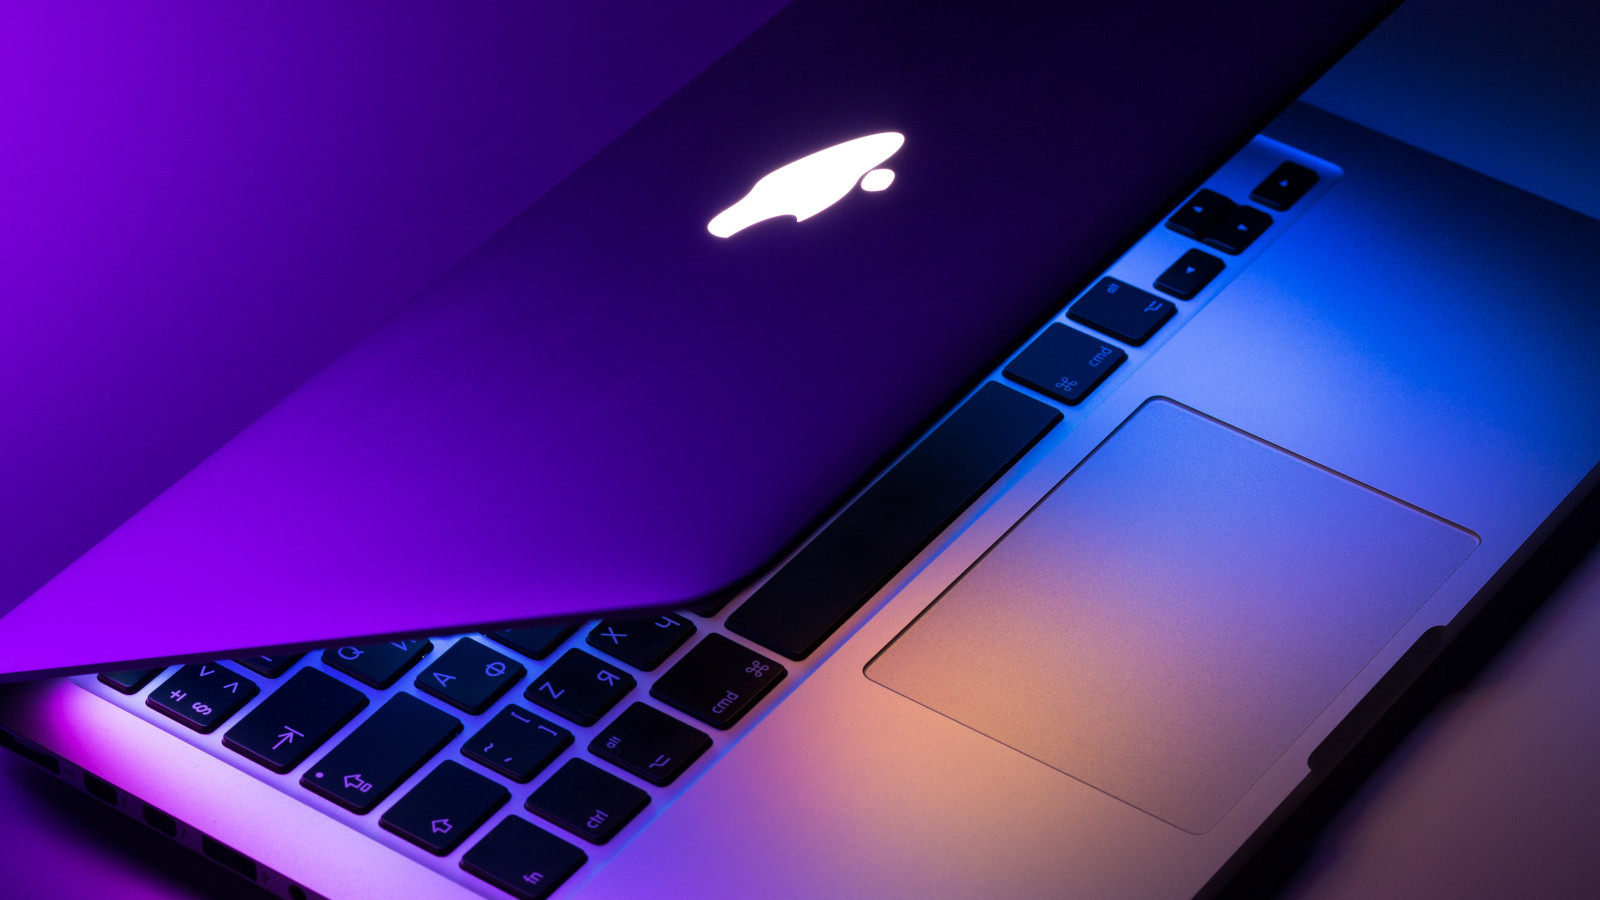 This refurbished MacBook Pro is half off now with this deal